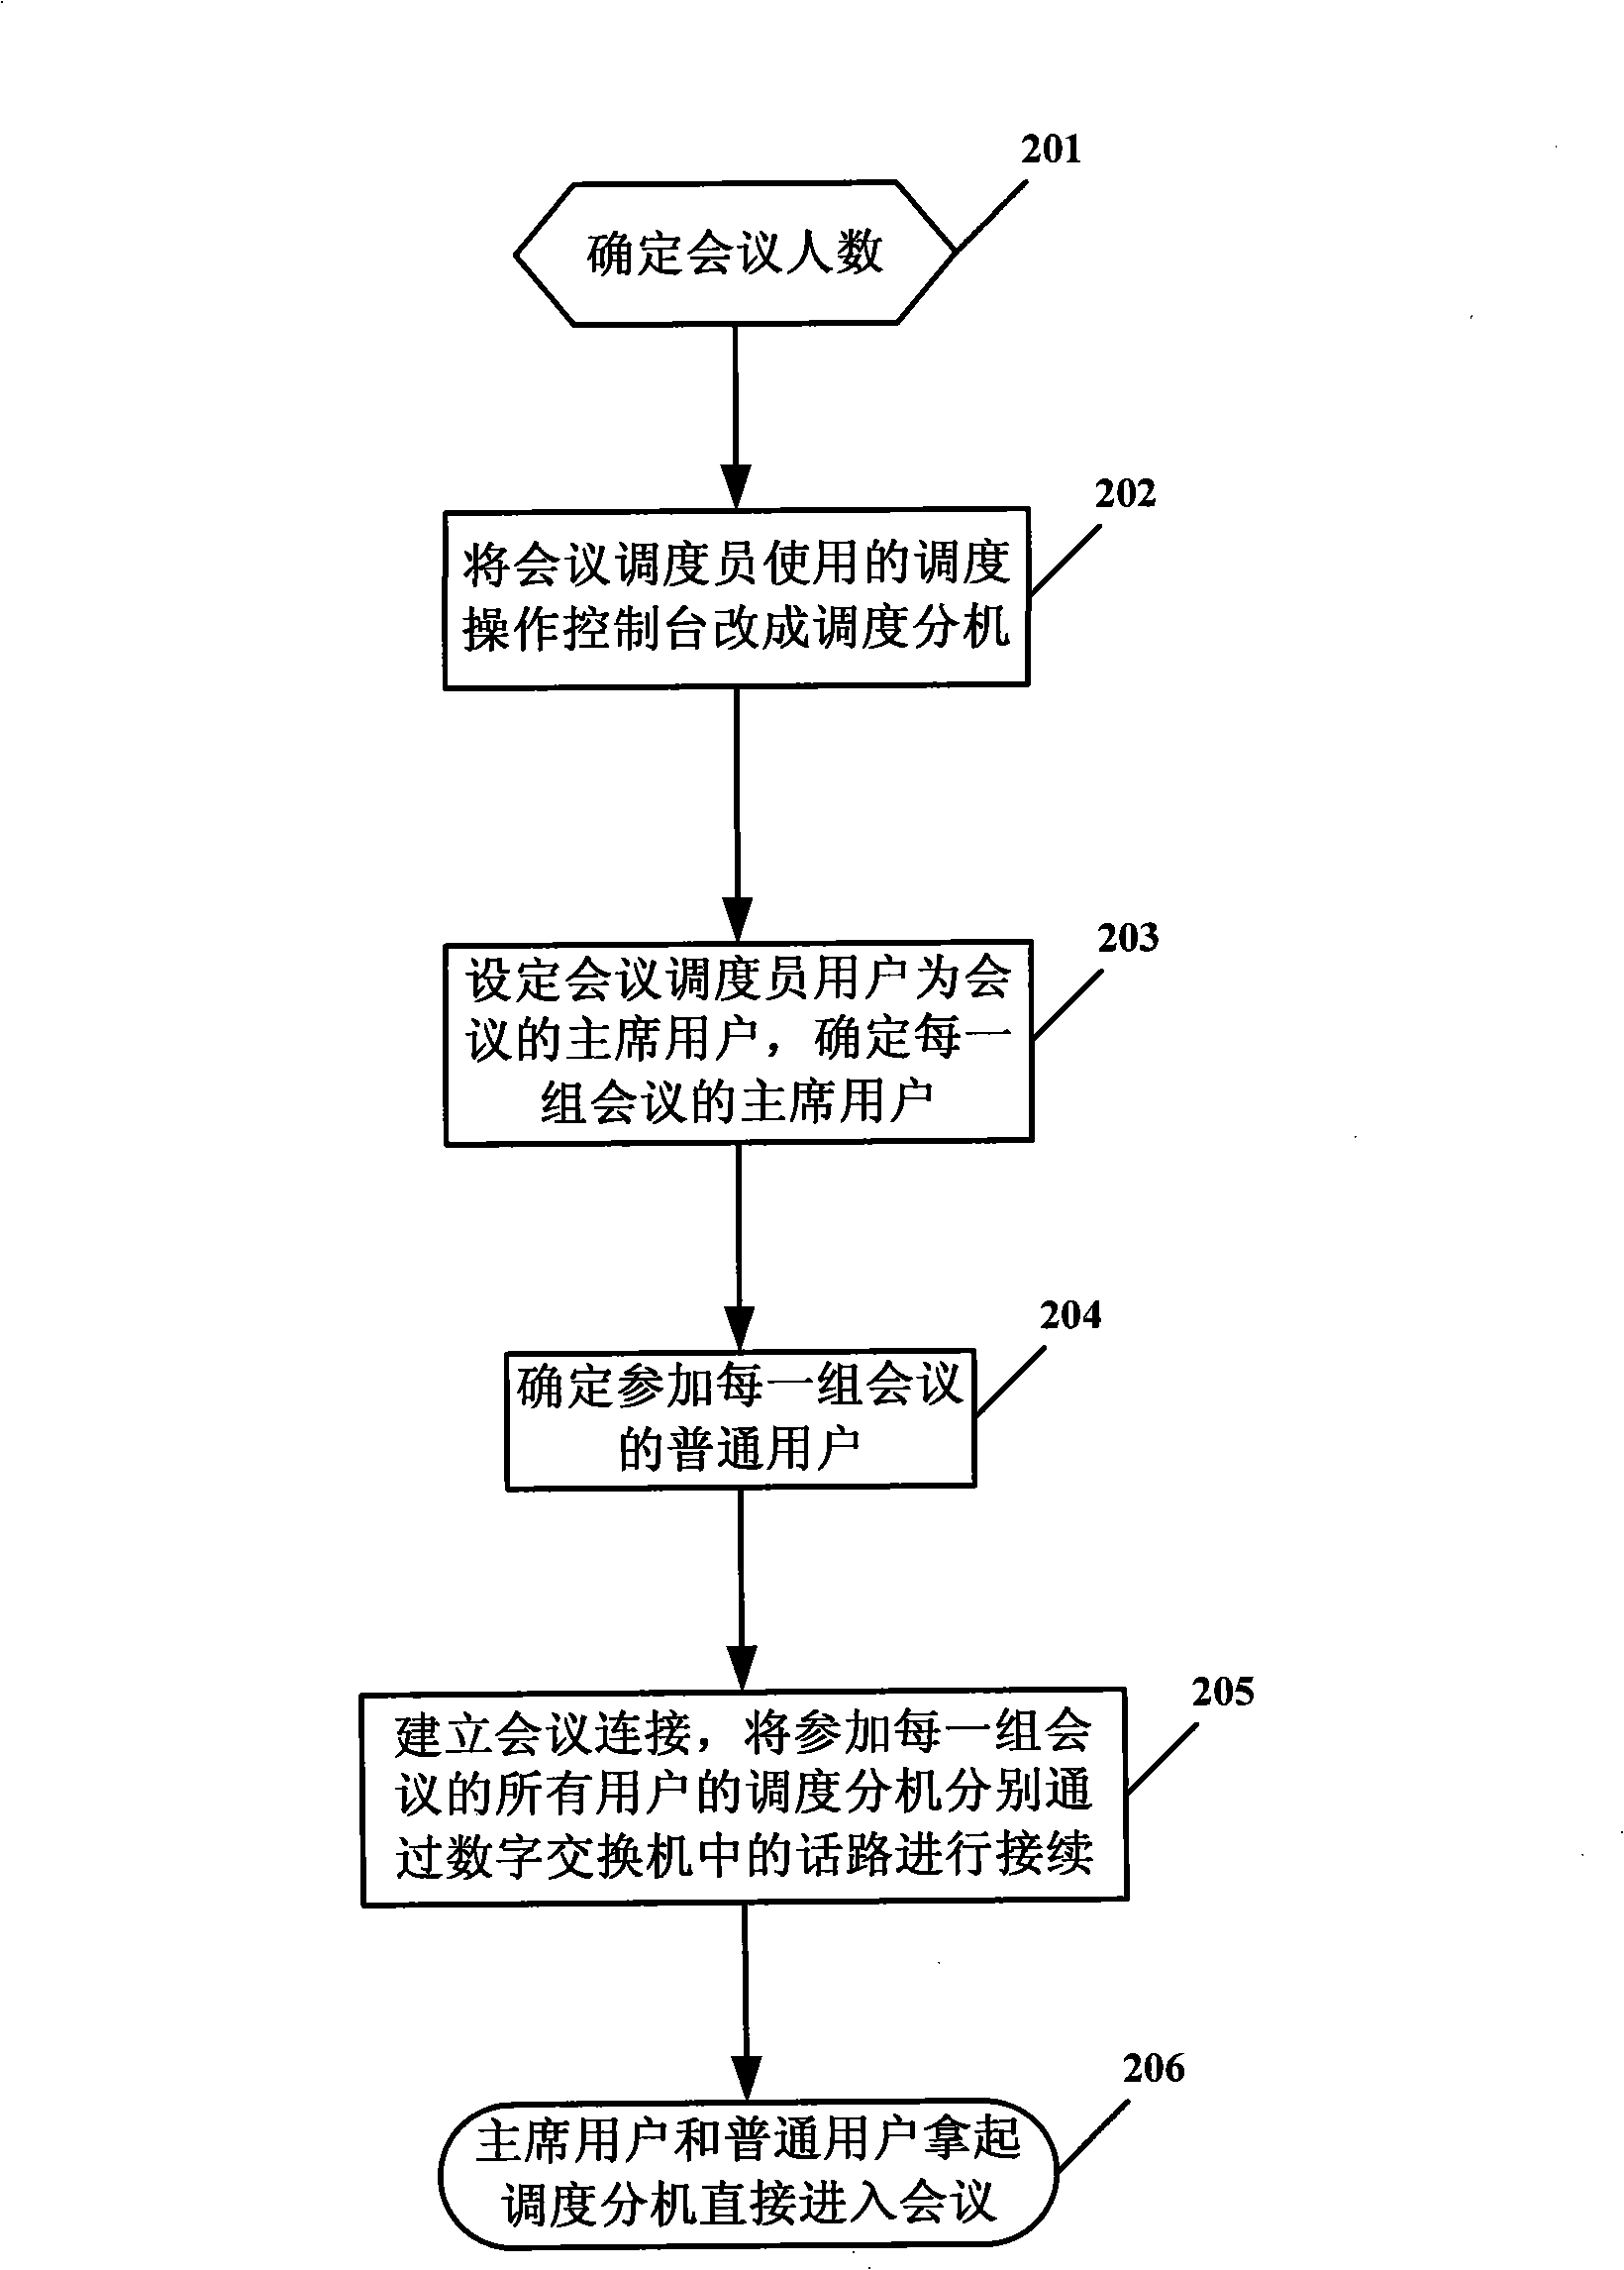 Method for implementing conference scheduling through digital switch